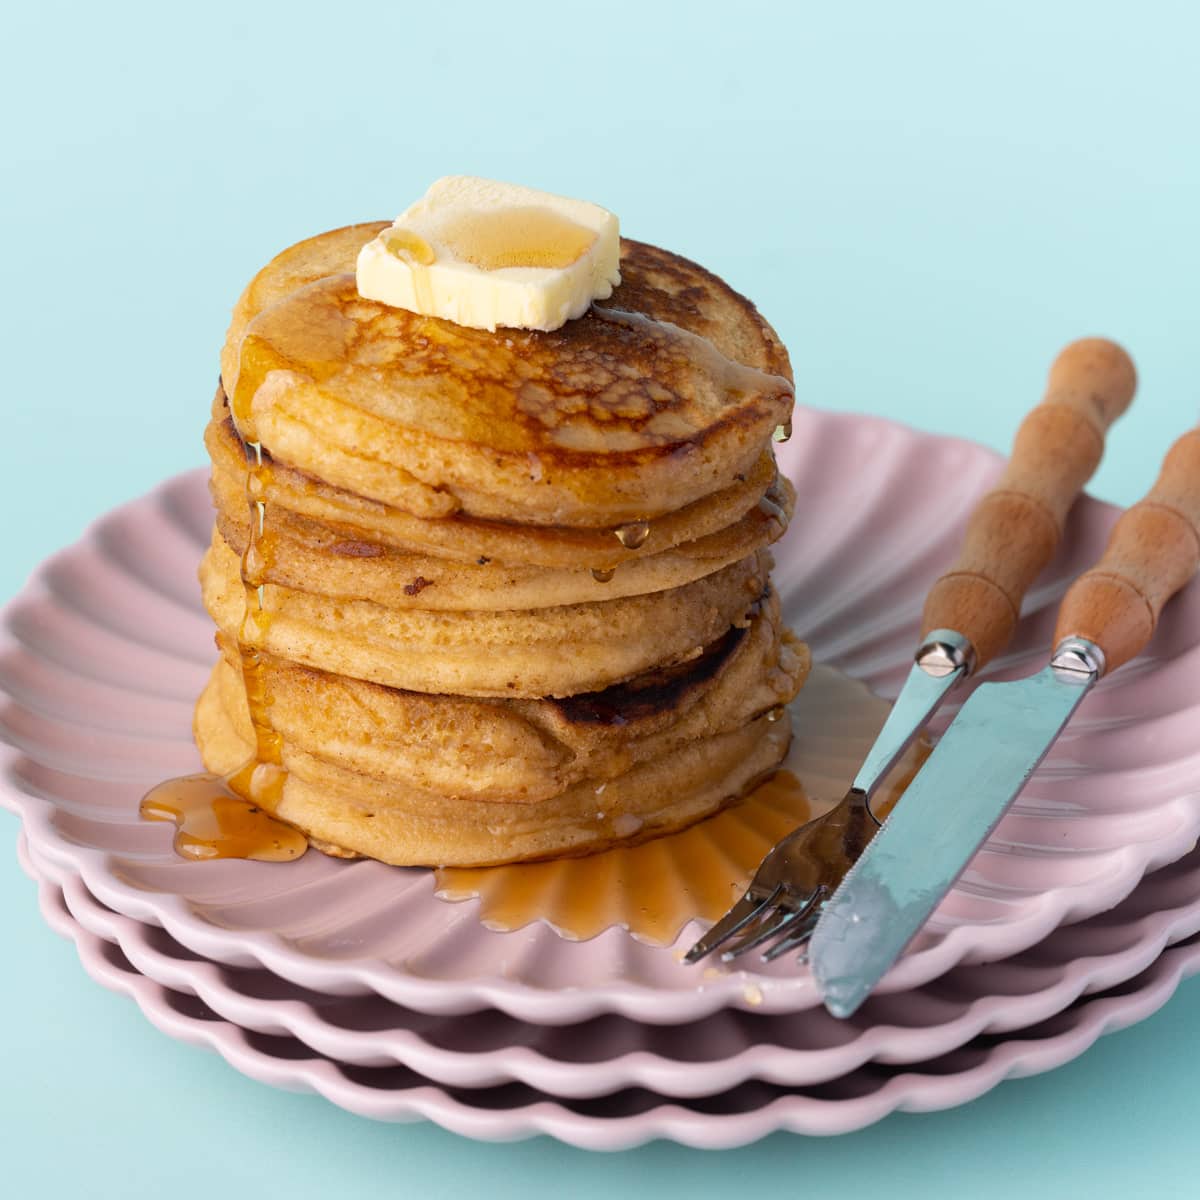 Stack of brown sugar pancakes with dripping syrup on pink plates